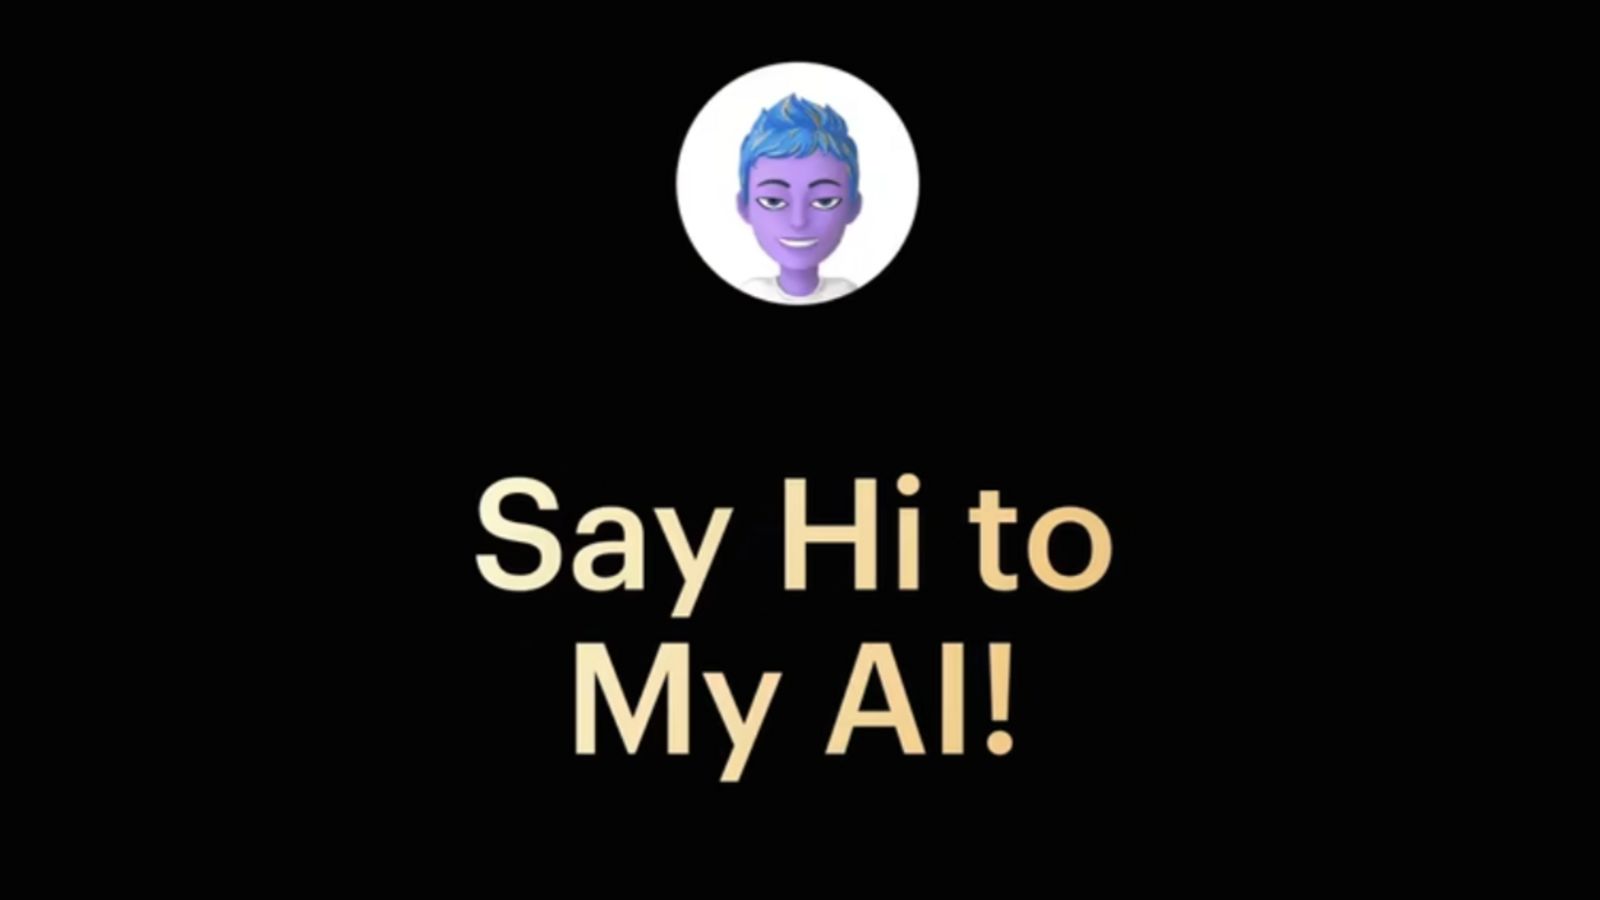 Artificial intelligence-powered chatbot from Snapchat: My AI!